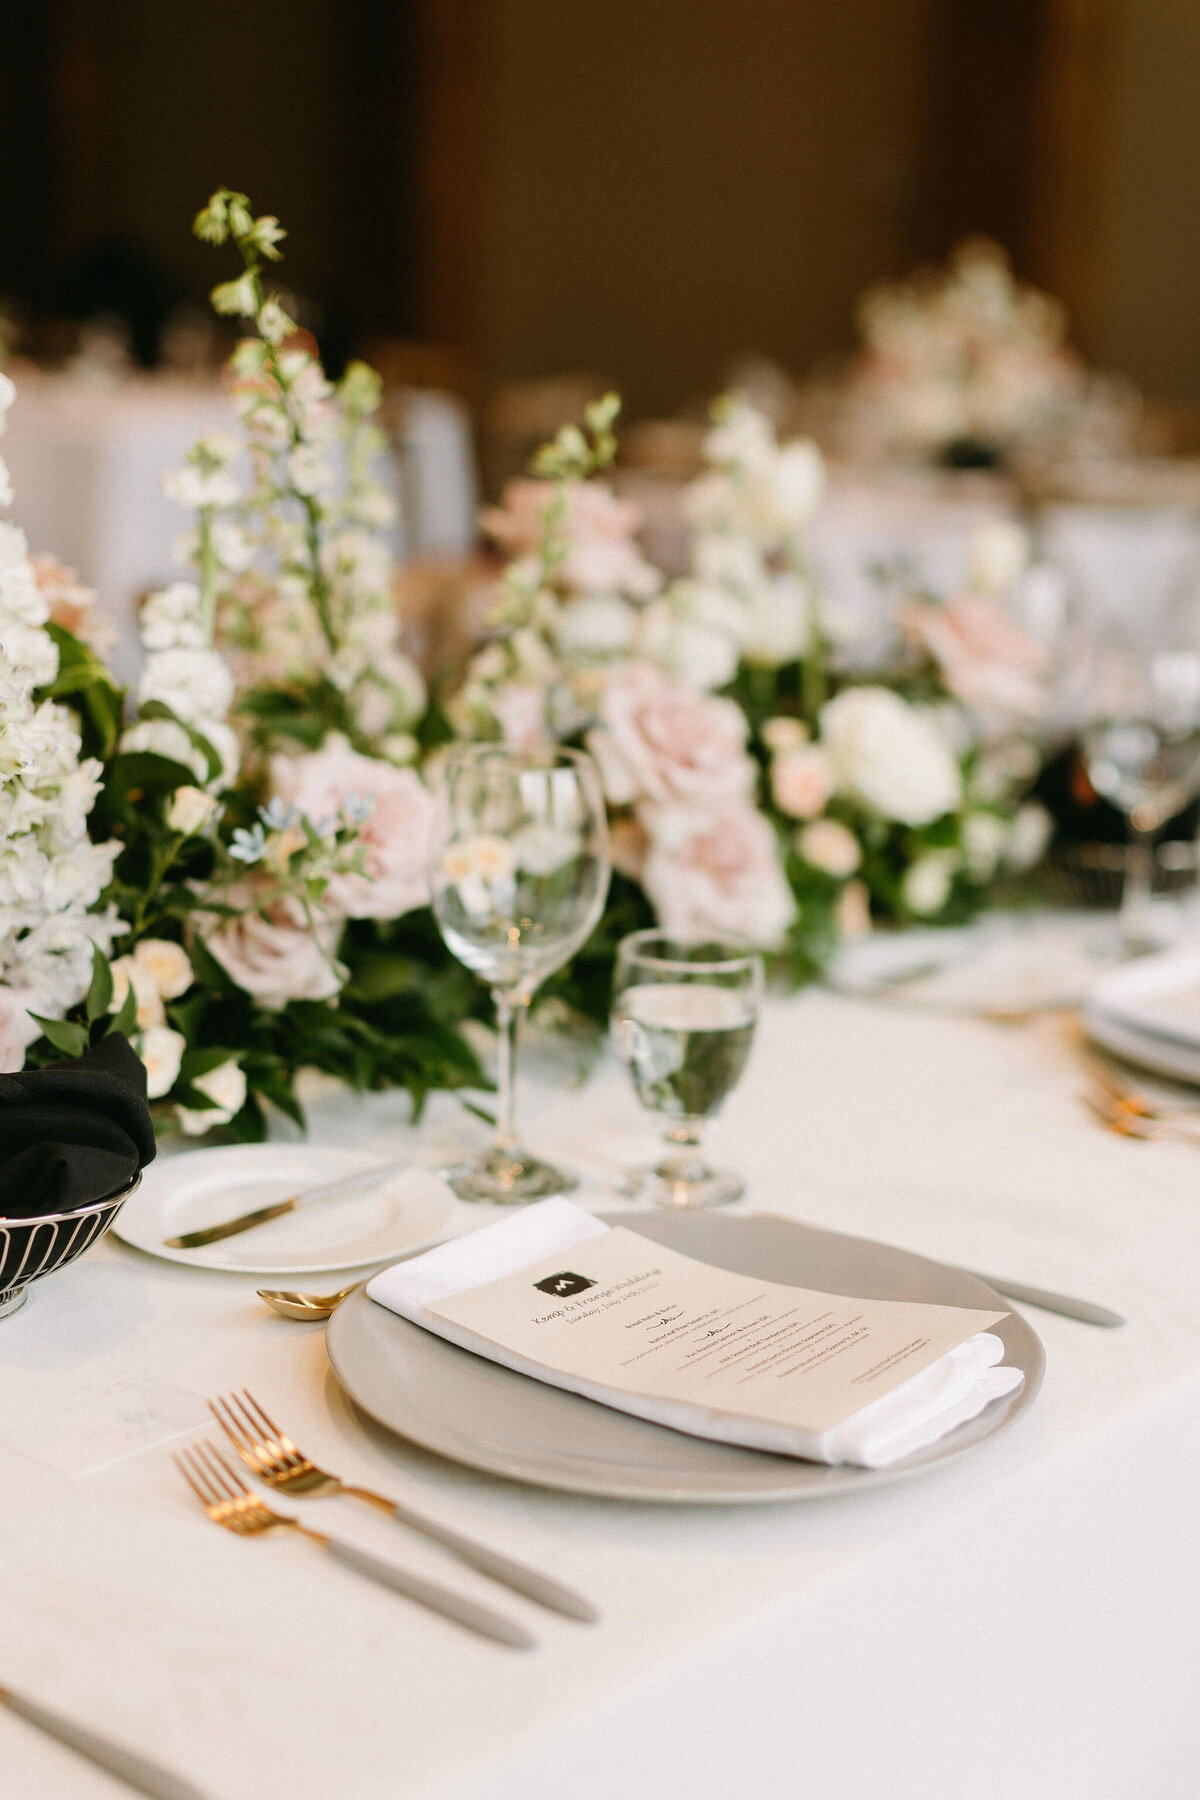 Elegant and romantic tablescape by CNC Event Design, modern and elegant wedding planner based in Calgary, Alberta.  Featured on the Brontë Bride Vendor Guide.